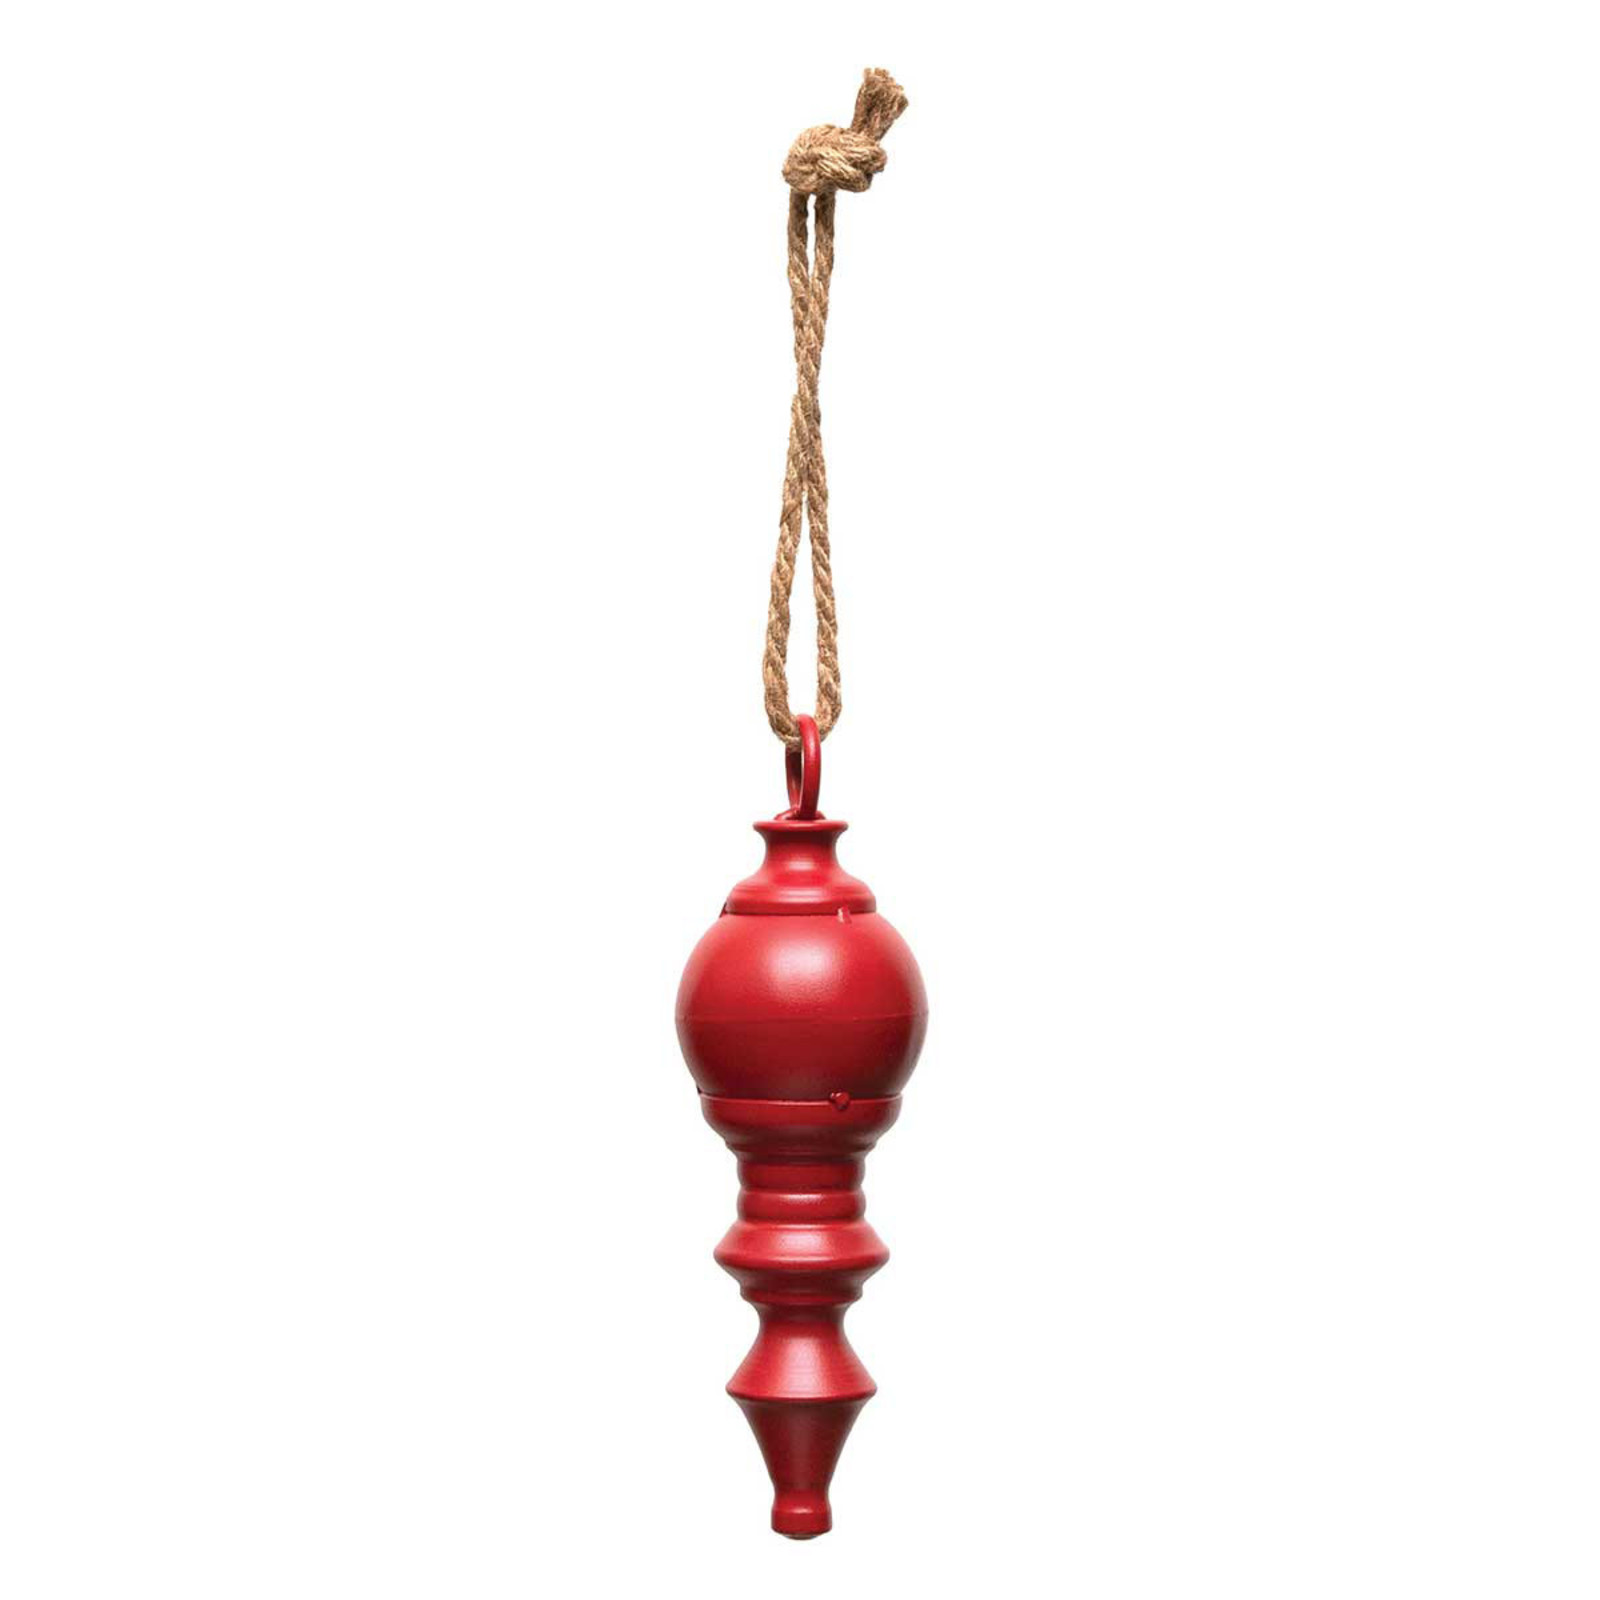 Meravic FINIAL METAL MATTE RED WITH ROPE HANGER SMALL    R1064 loading=